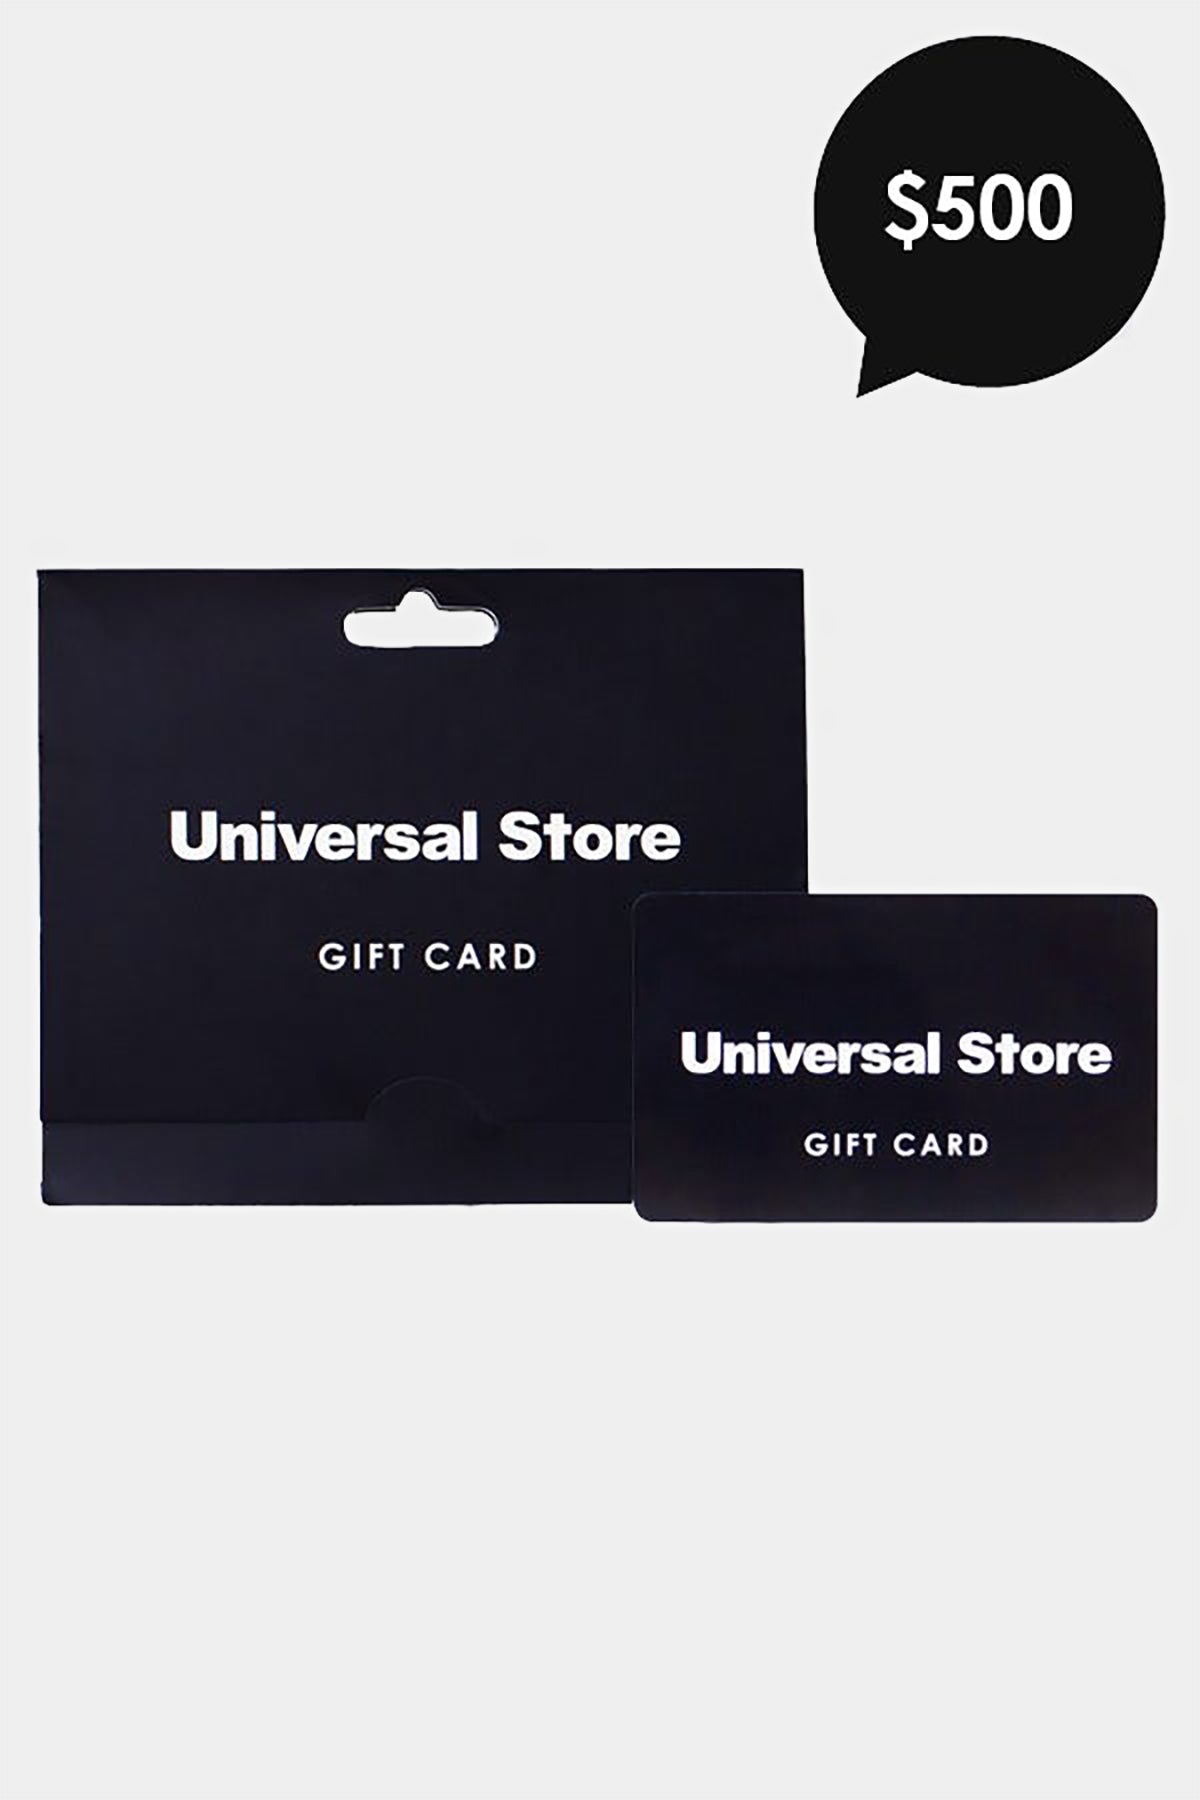 Universal Store $500 Gift Card